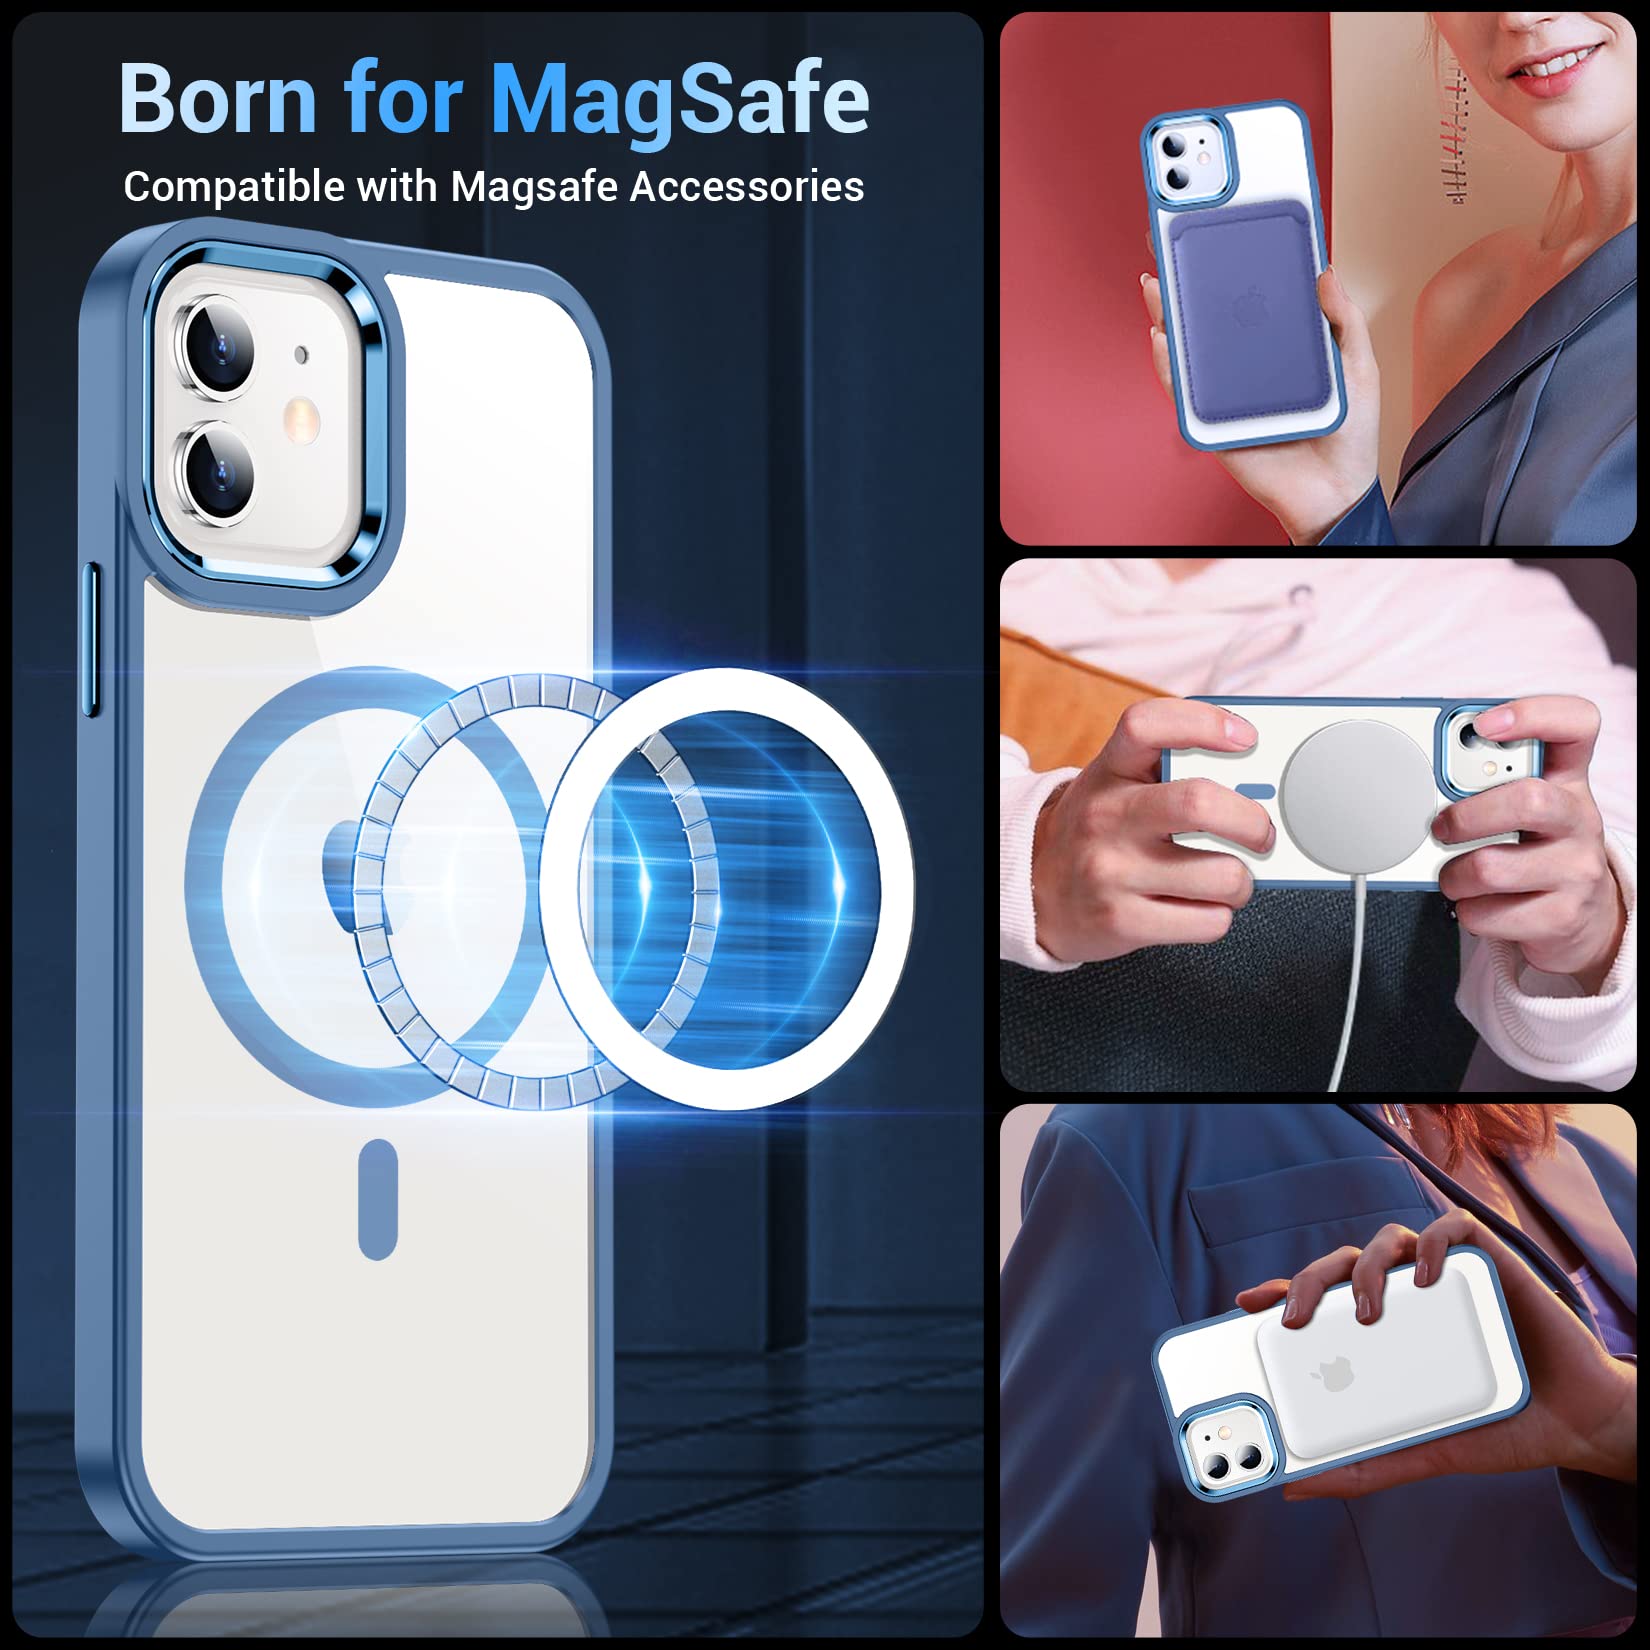 Temdan Magnetic Case for iPhone 12 Case & iPhone 12 Pro Case Clear,[Compatible with Magsafe 12 FT Shockproof ][2 Pcs Glass Screen Protector] [Not Yellowing] Slim Thin Phone Case Cover -Blue